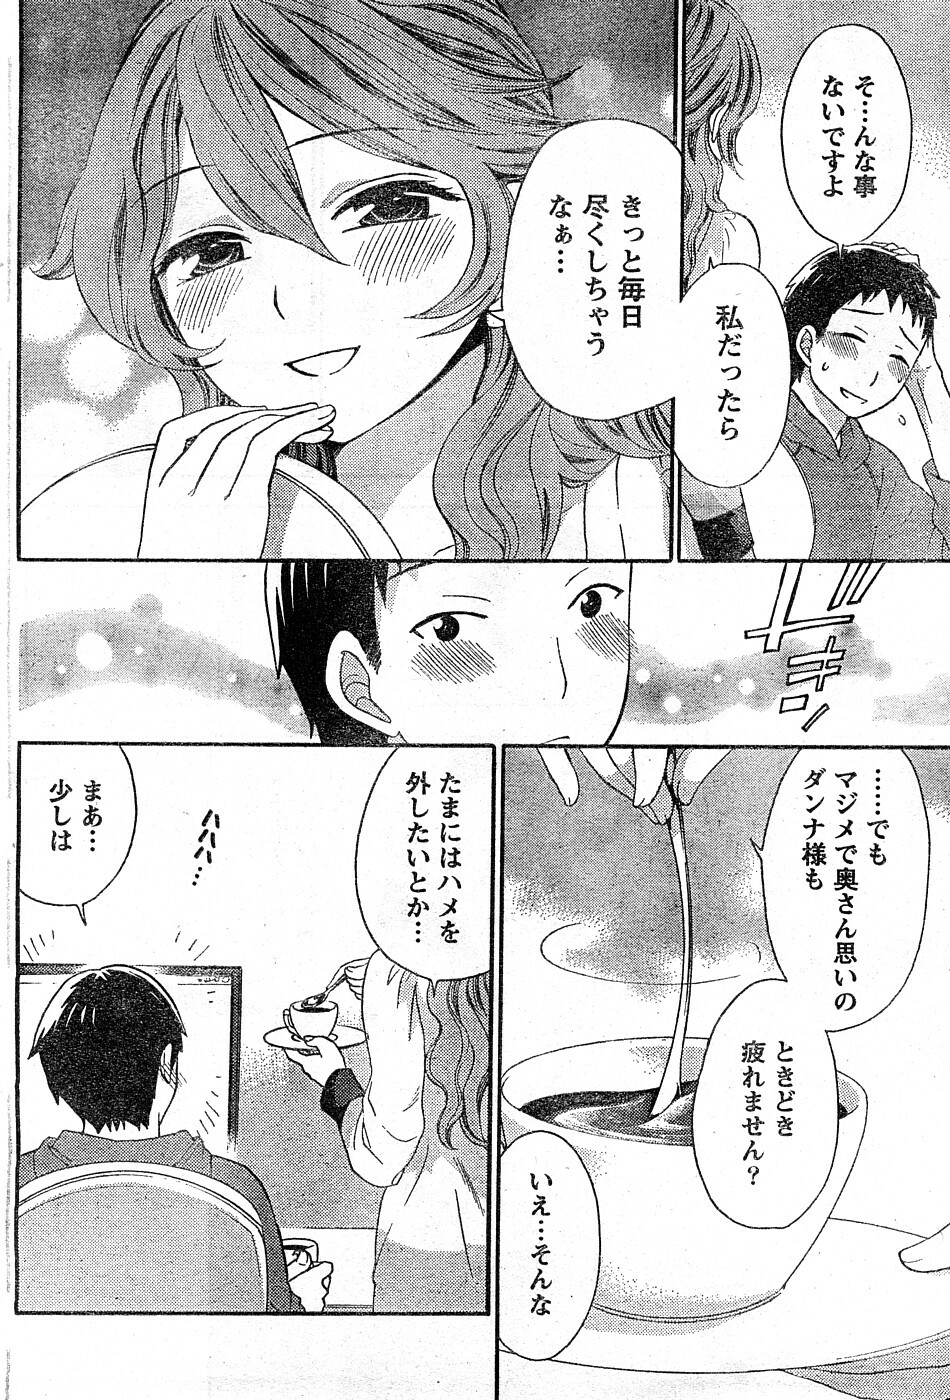 Monthly Vitaman 2009-02 [Incomplete] page 39 full